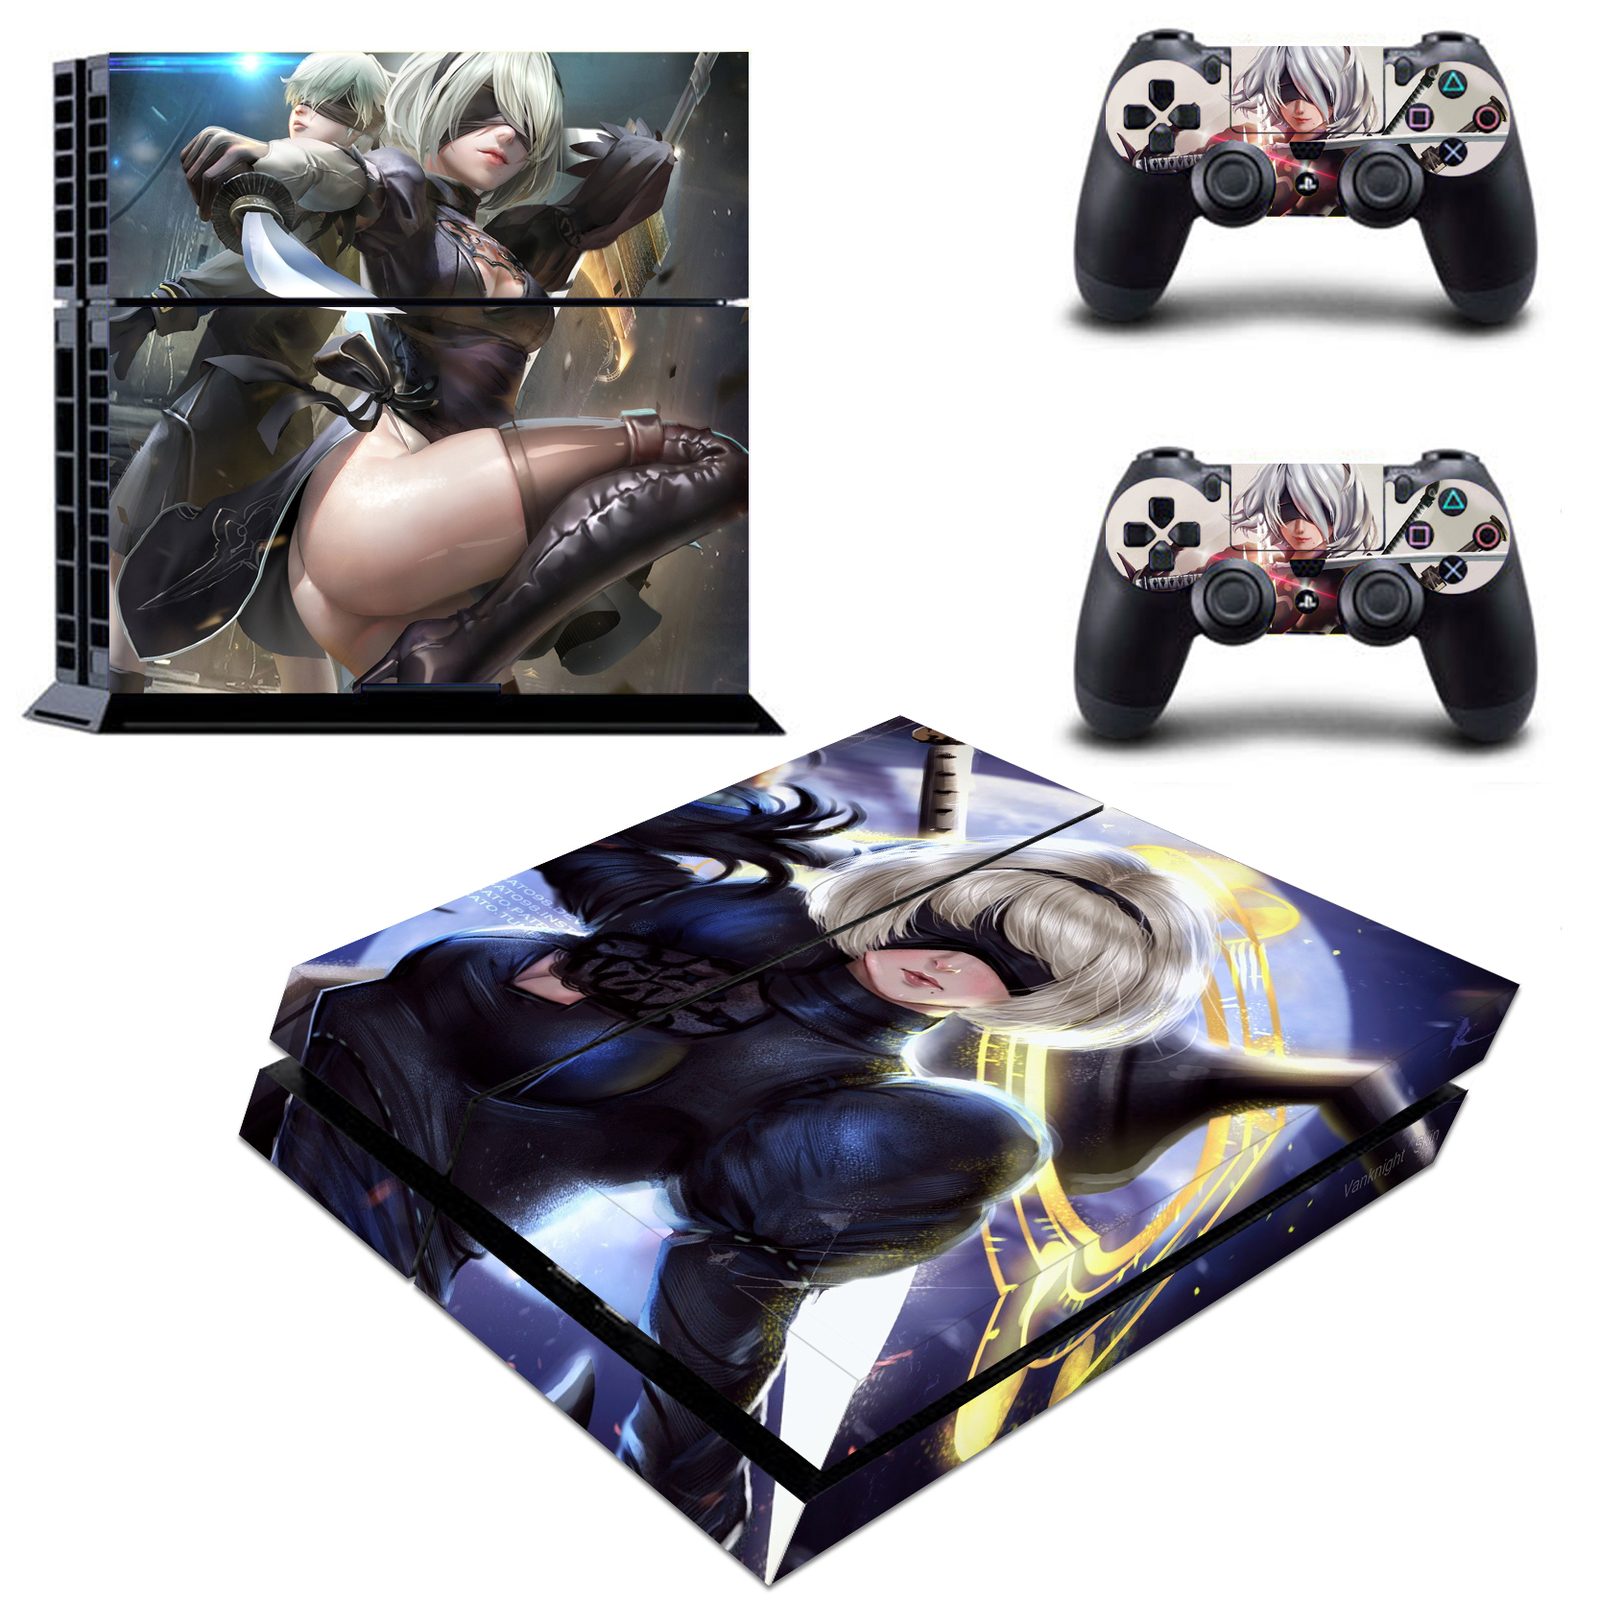 nier automata ps4 controller on steam